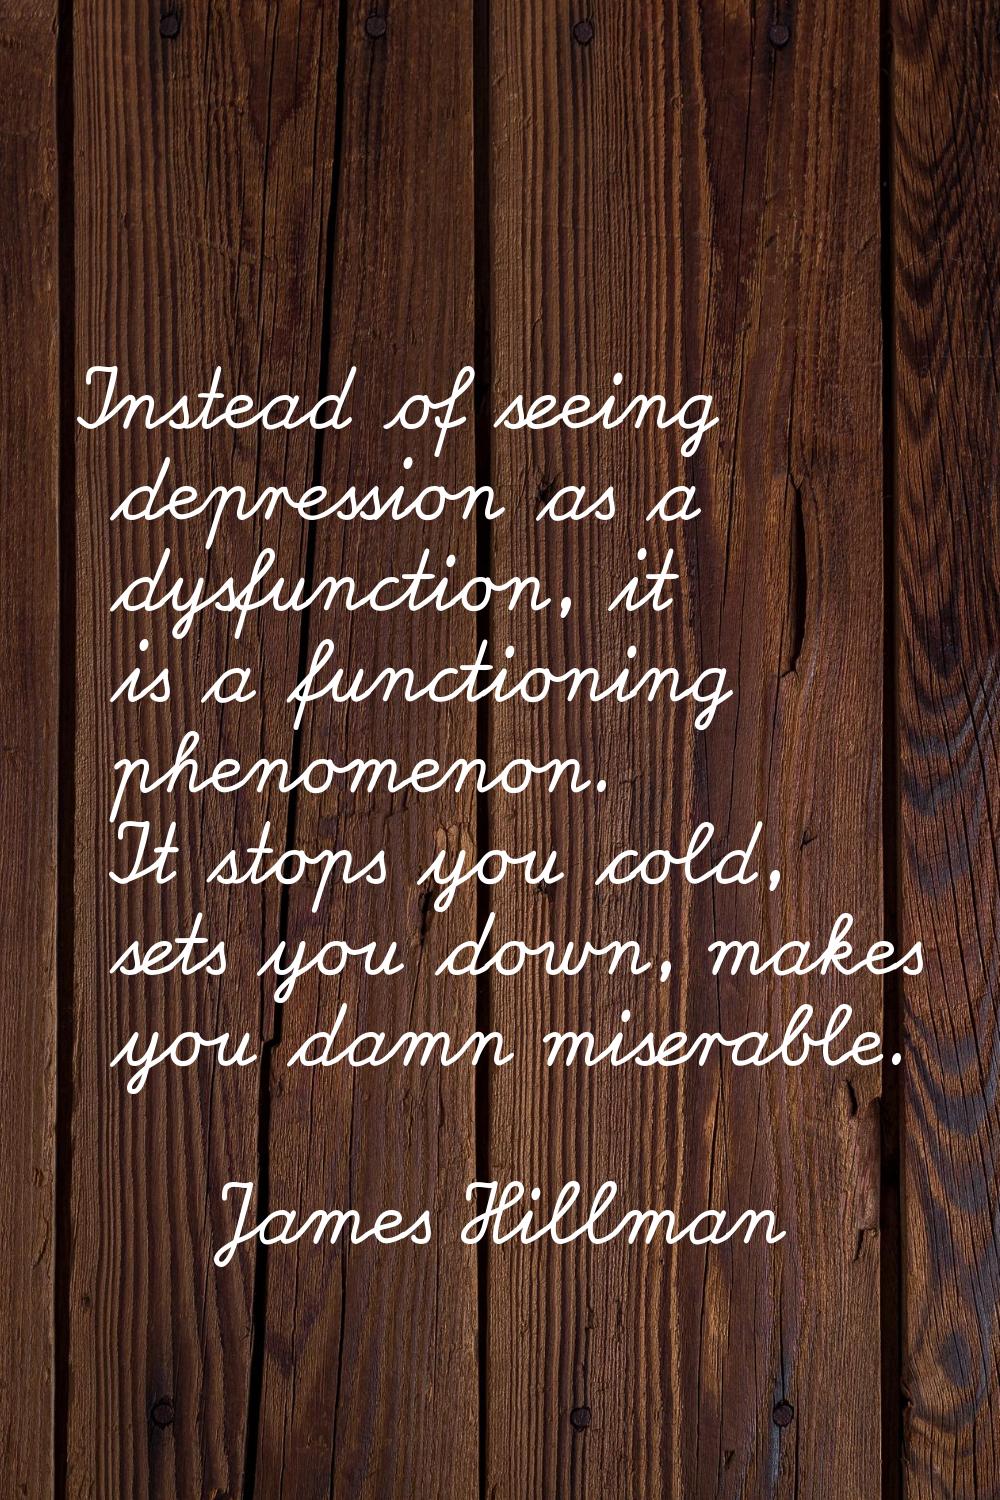 Instead of seeing depression as a dysfunction, it is a functioning phenomenon. It stops you cold, s